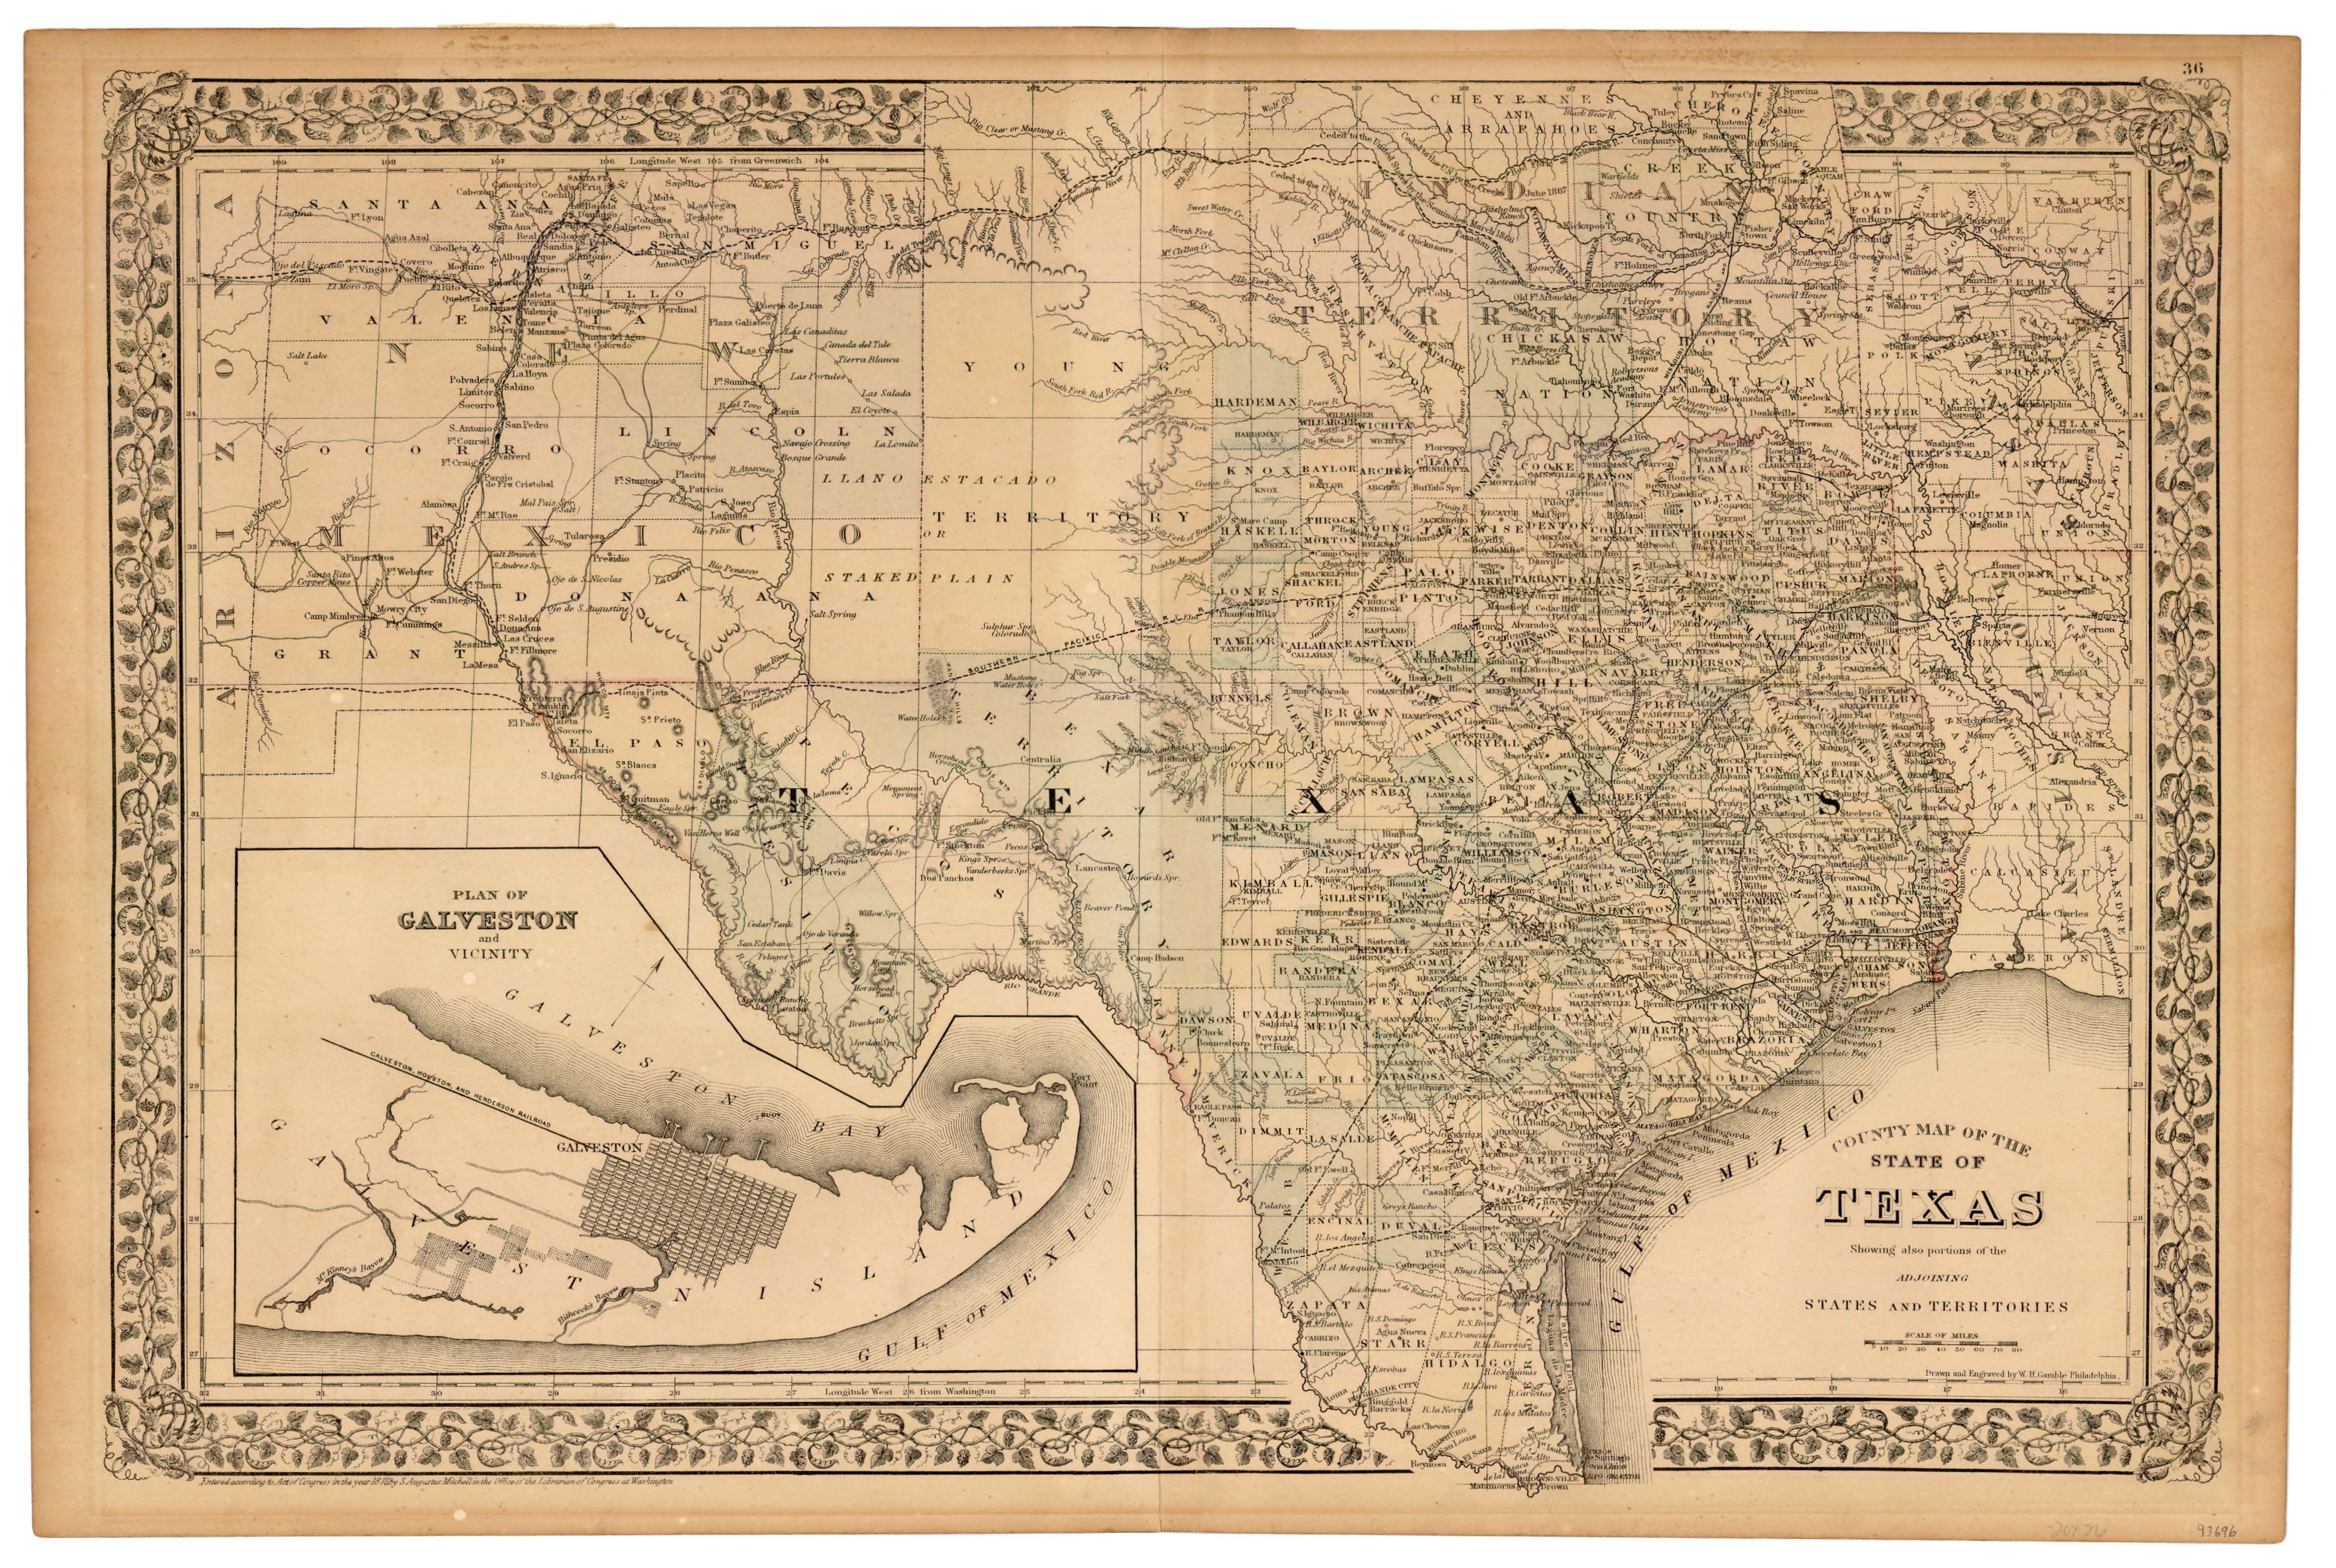 "County Map of the State of Texas Showing also portions of the Adjoining States and Territories," GLO Map 93696